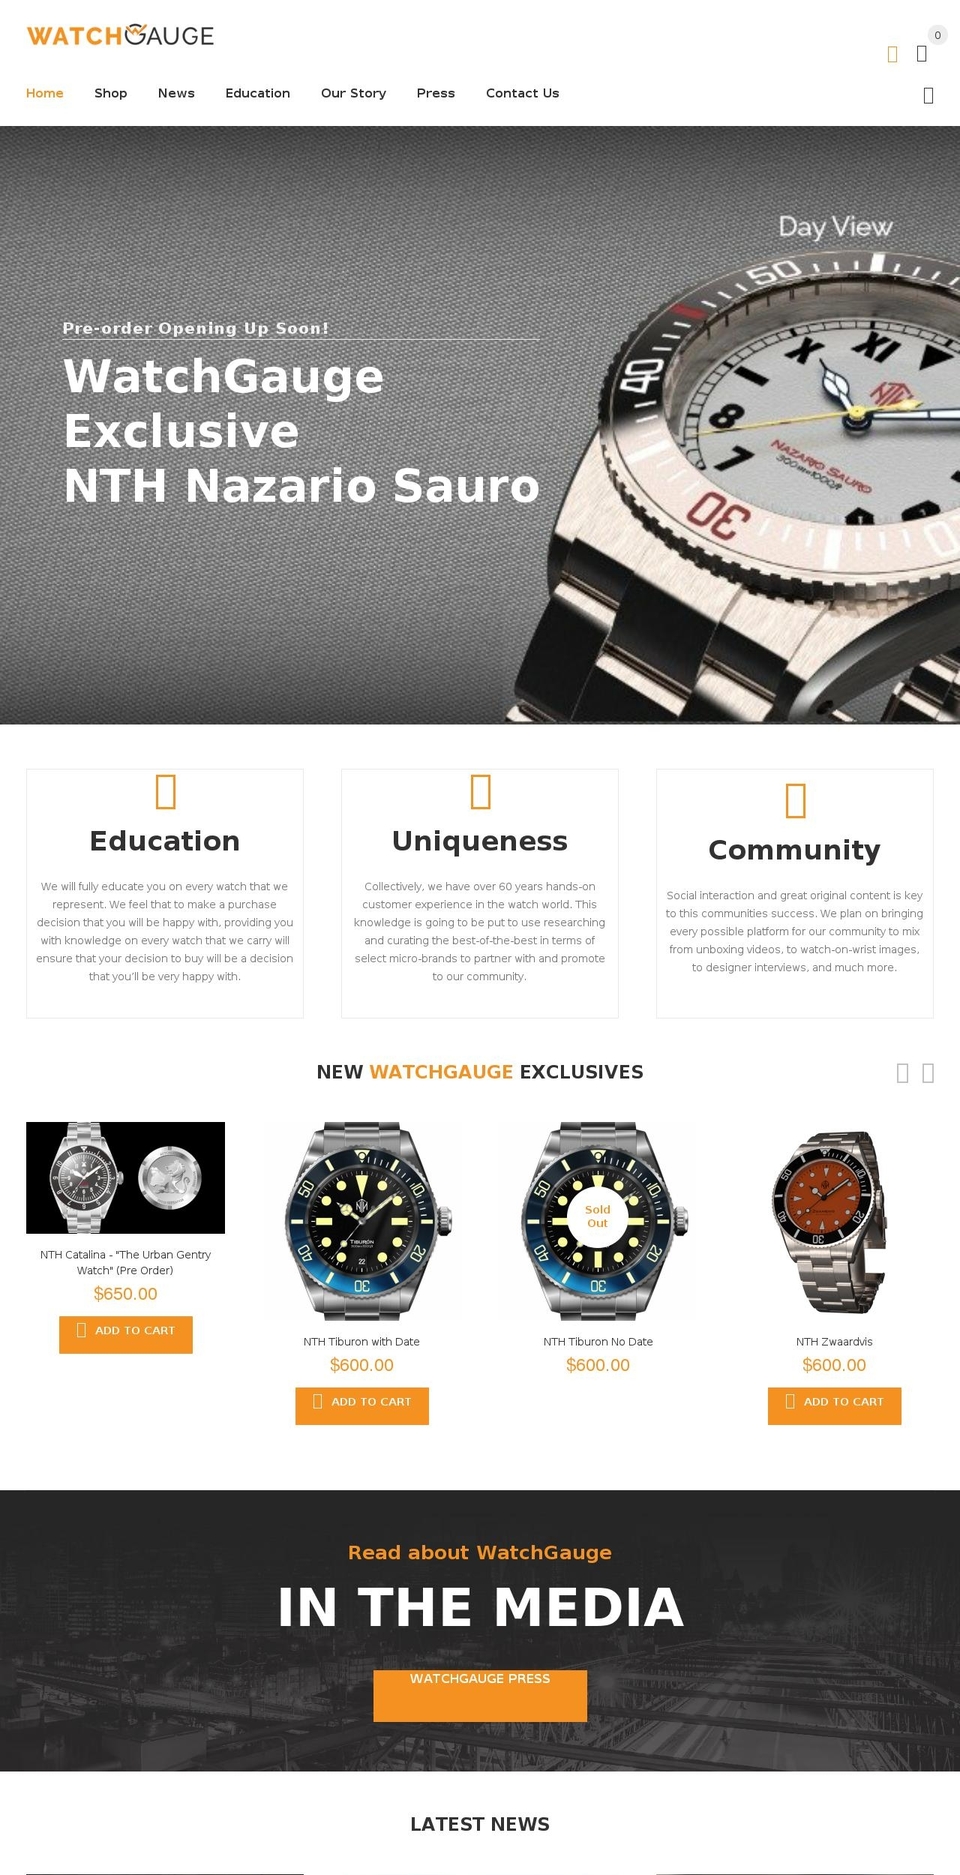 Story Shopify theme site example watchgauge.com